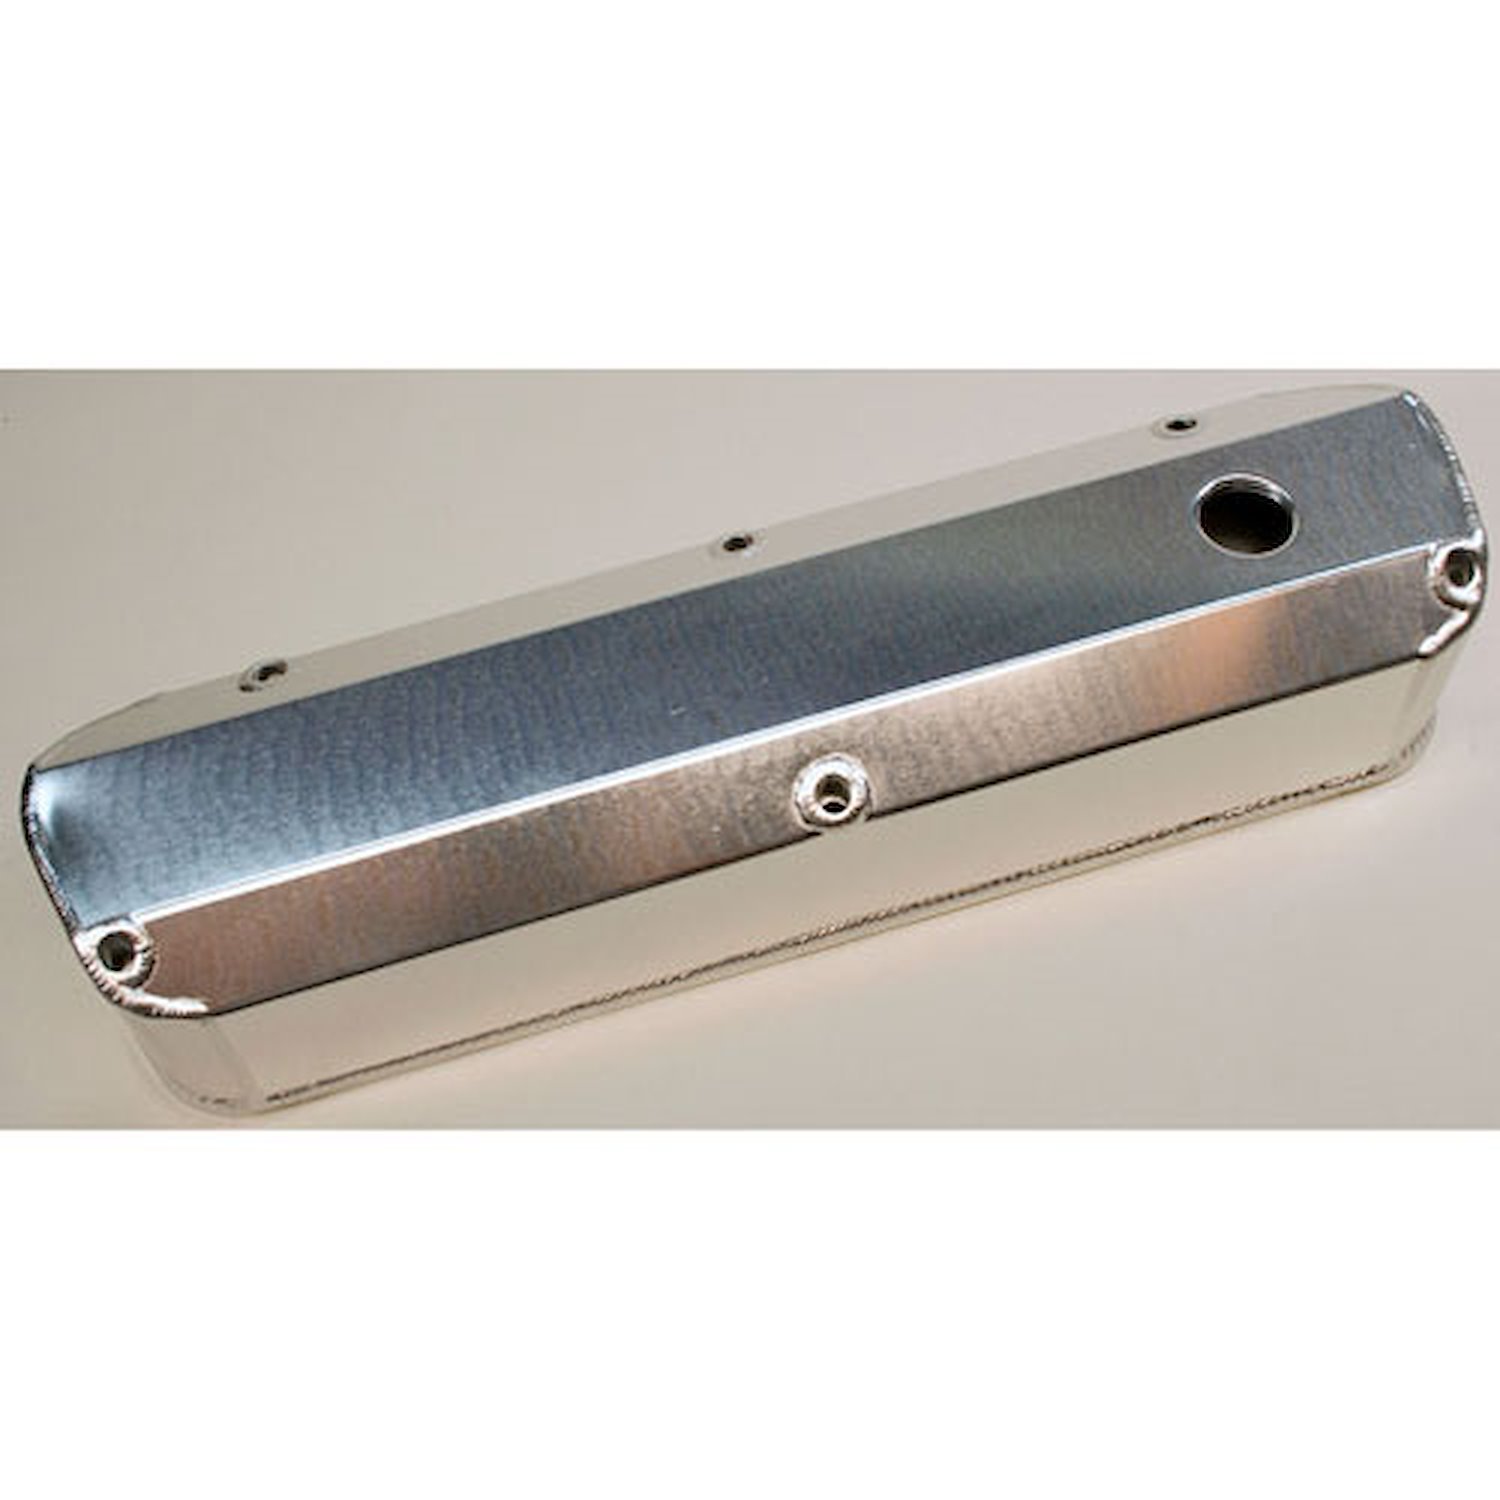 Fabricated Aluminum Valve Covers Ford 302/351W